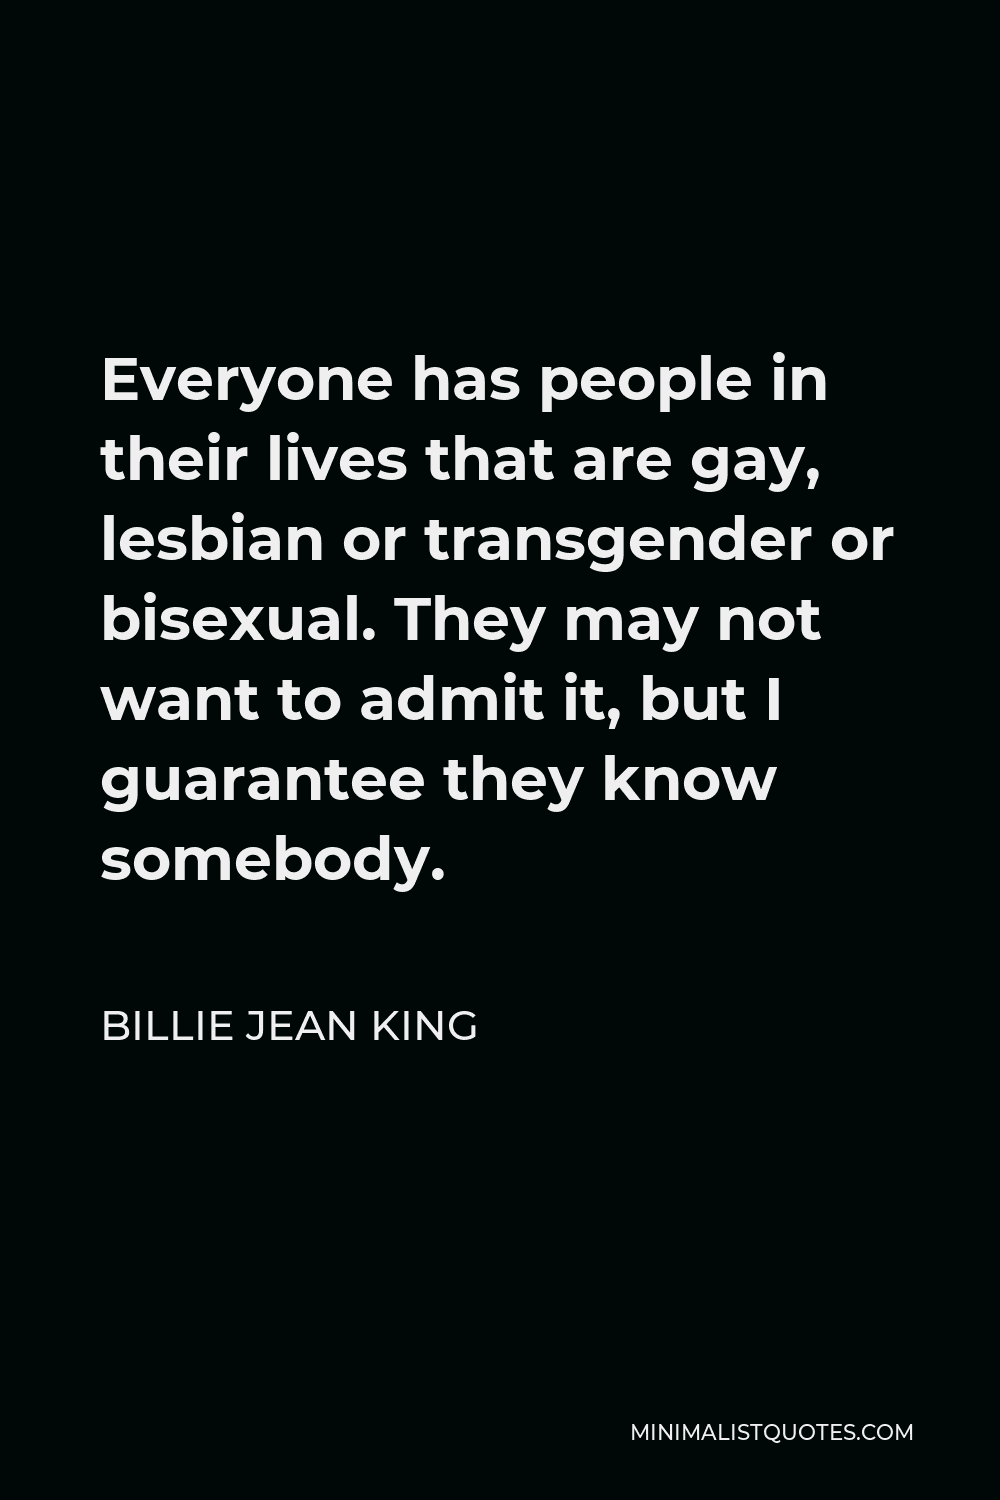 Billie Jean King Quote - Everyone has people in their lives that are gay, lesbian or transgender or bisexual. They may not want to admit it, but I guarantee they know somebody.